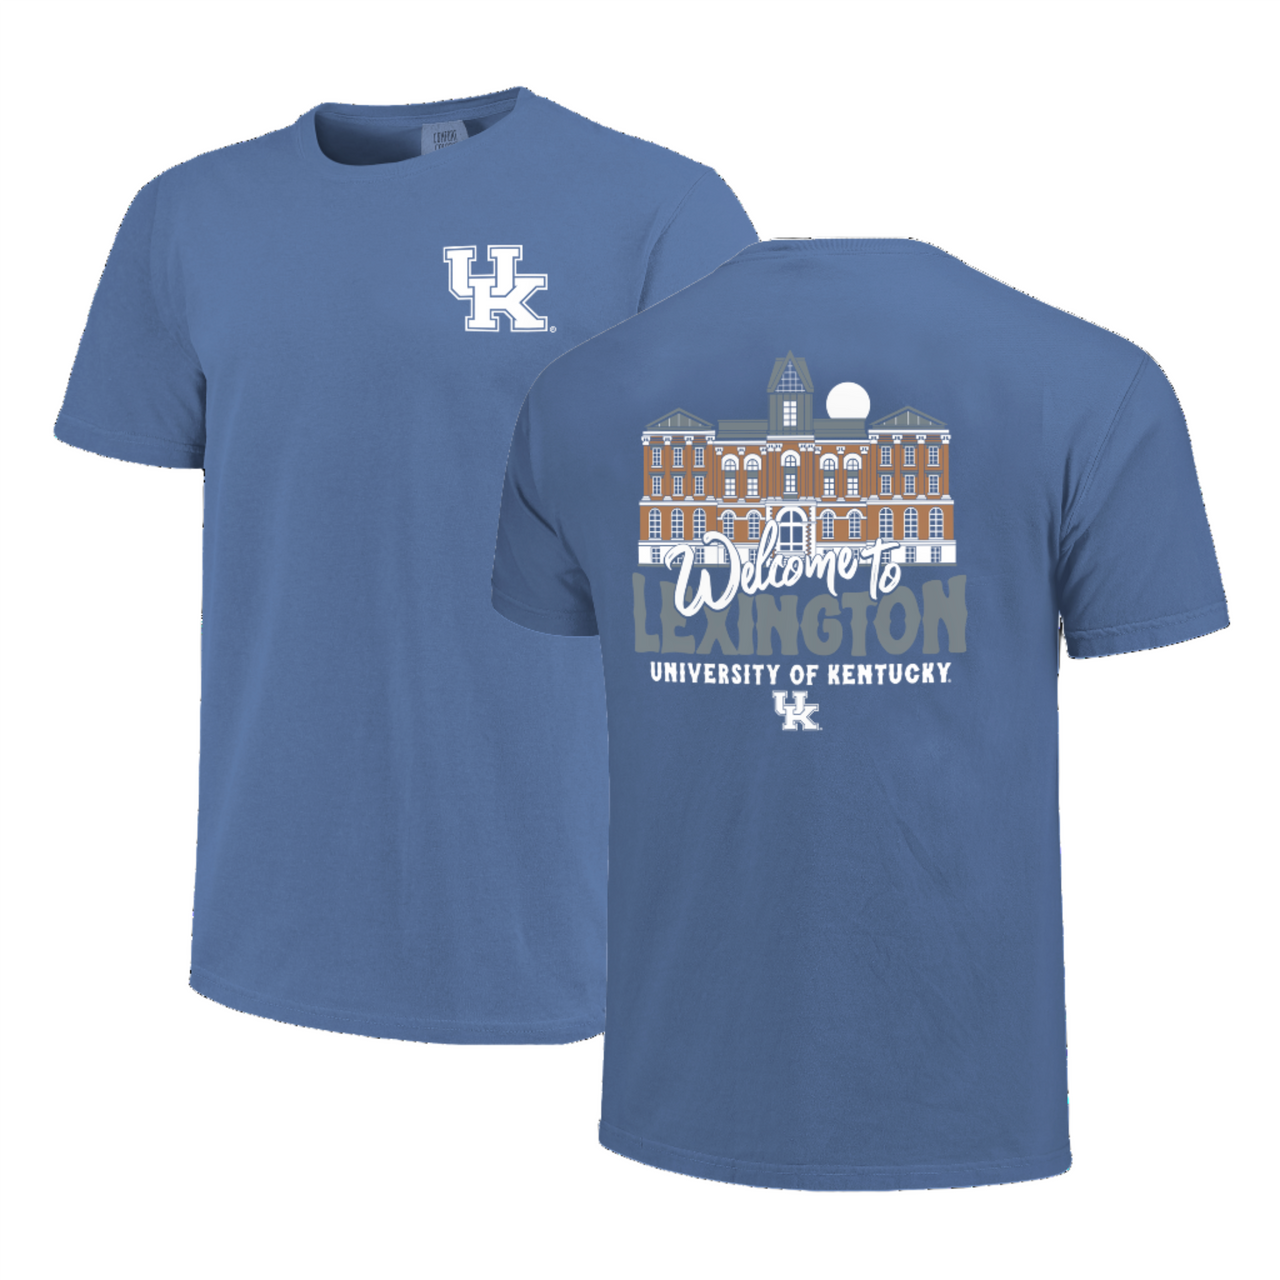 Kentucky Wildcats Welcome to Campus Royal Tshirt